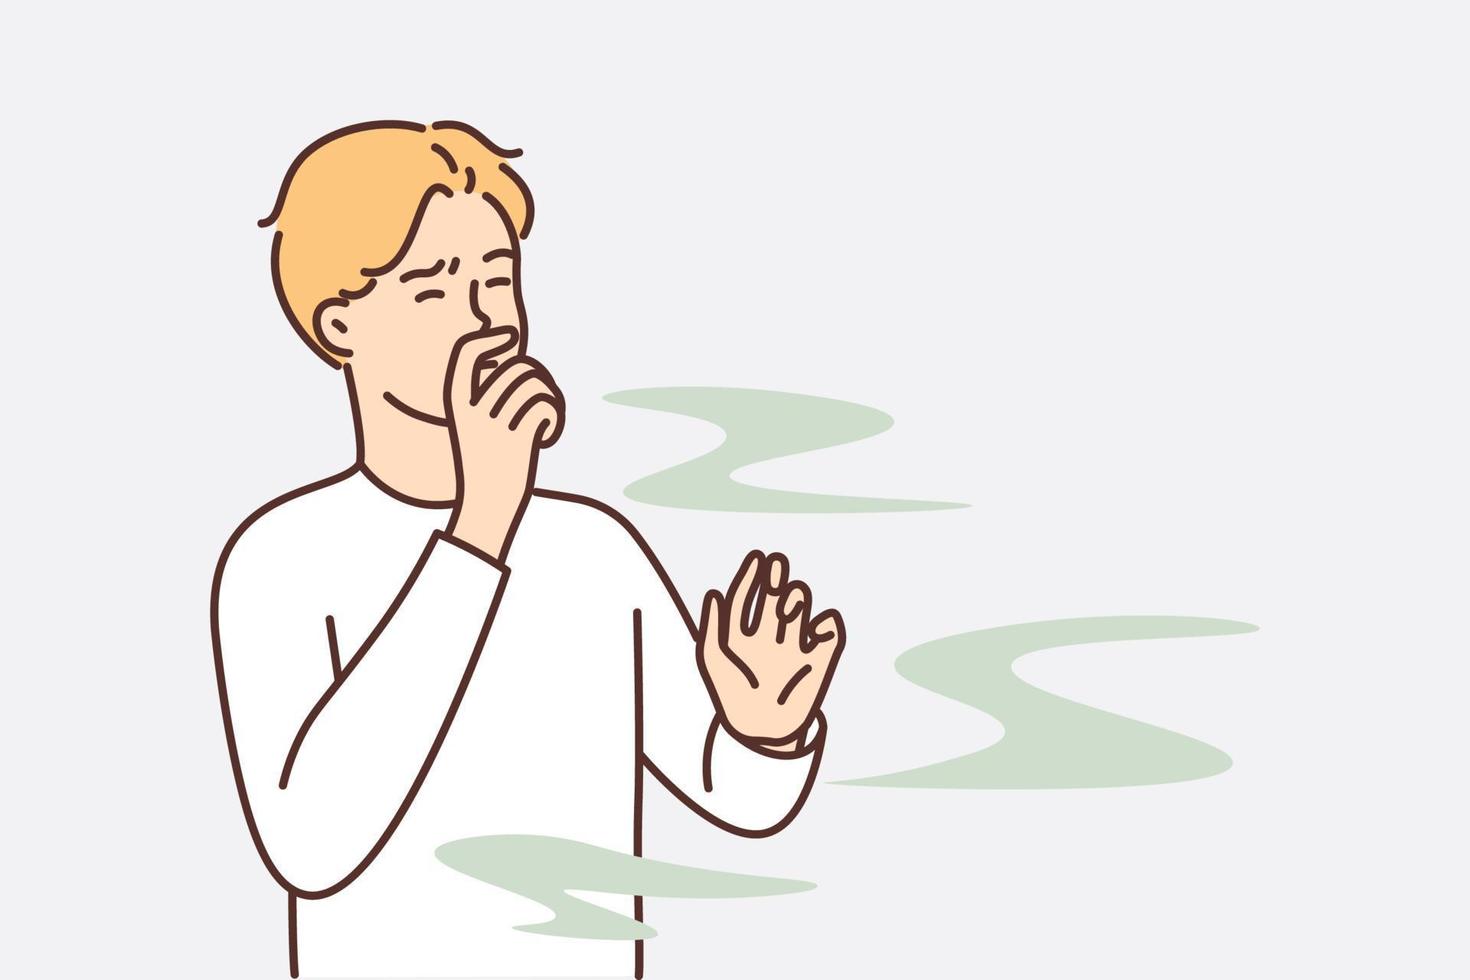 Man covers nose so as not to smell unpleasant smell from harmful production that pollutes environment. Guy grimaces and closes eyes, feels vile stench coming from missing products or garbage dump vector